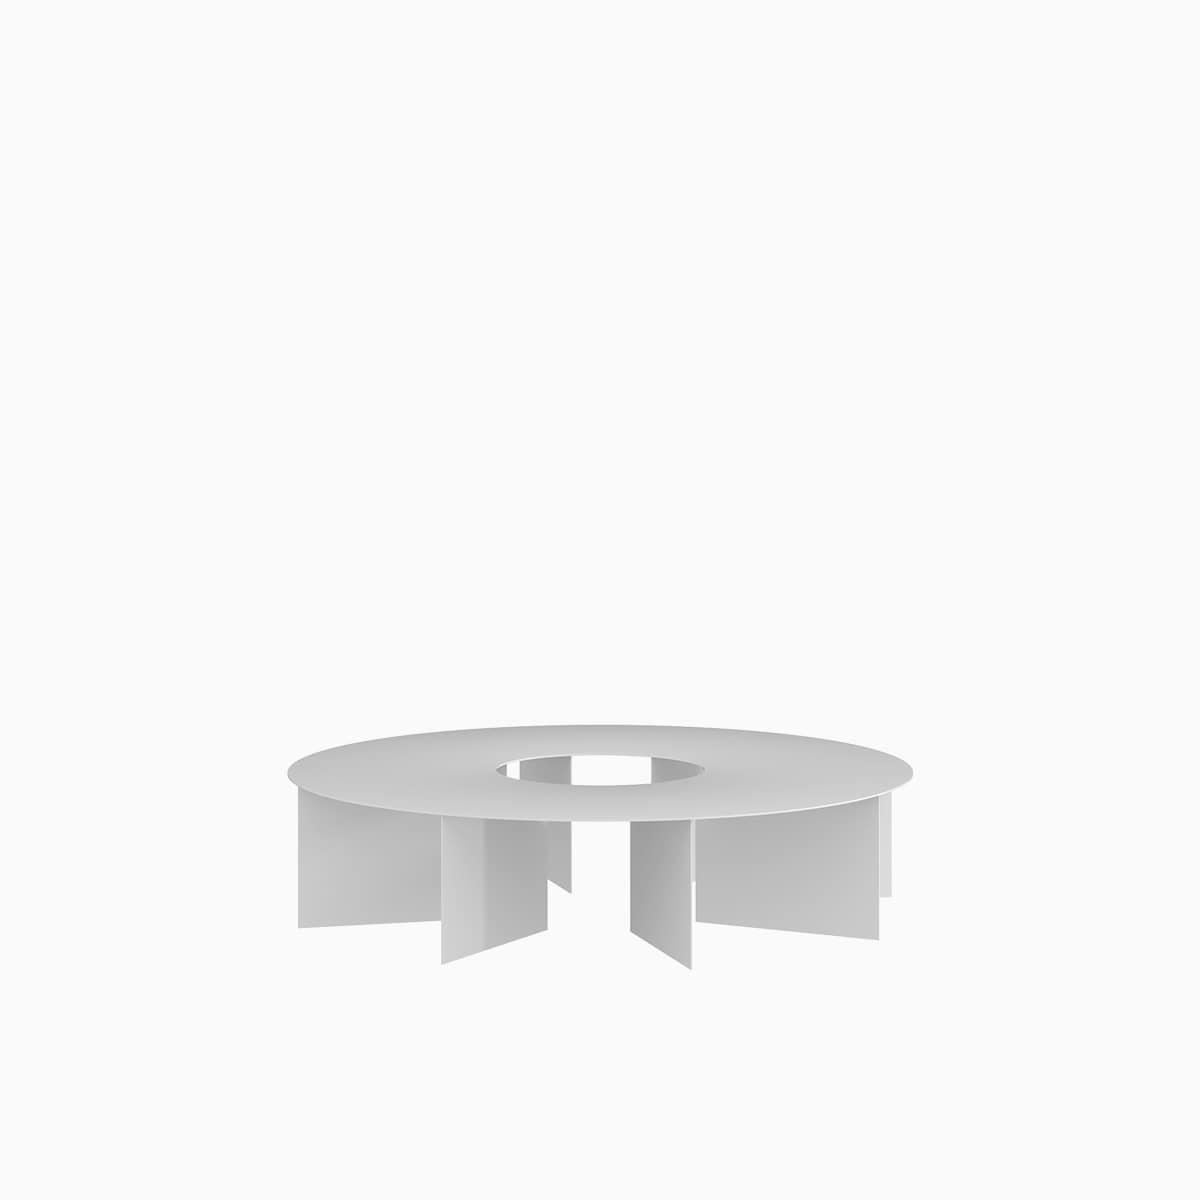 Mexican Reel Center Table - M For Sale